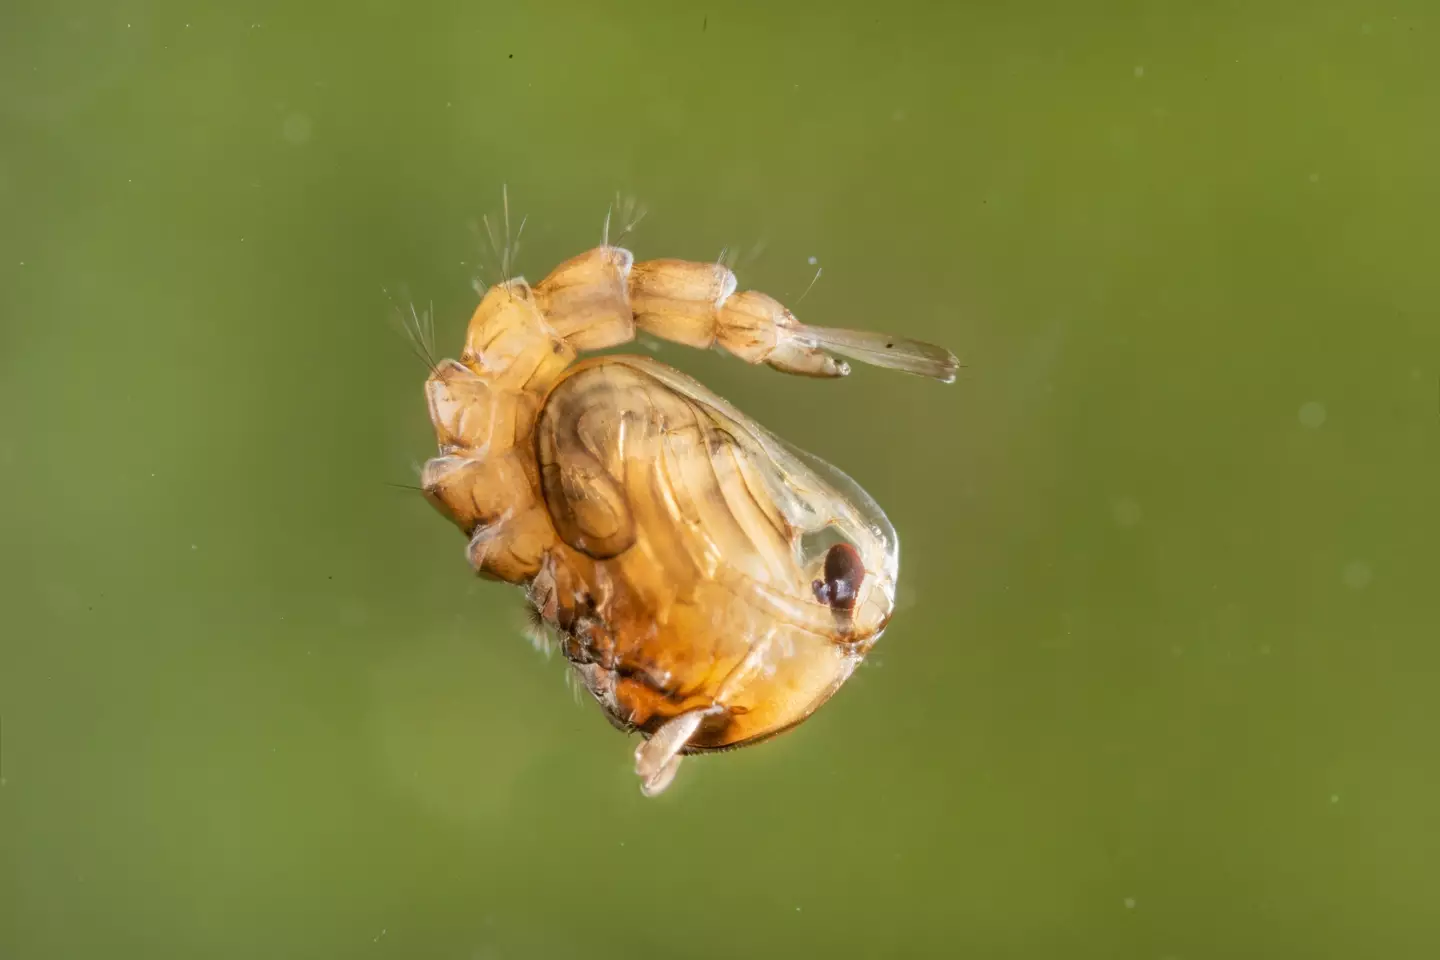 Mosquito pupa in water.